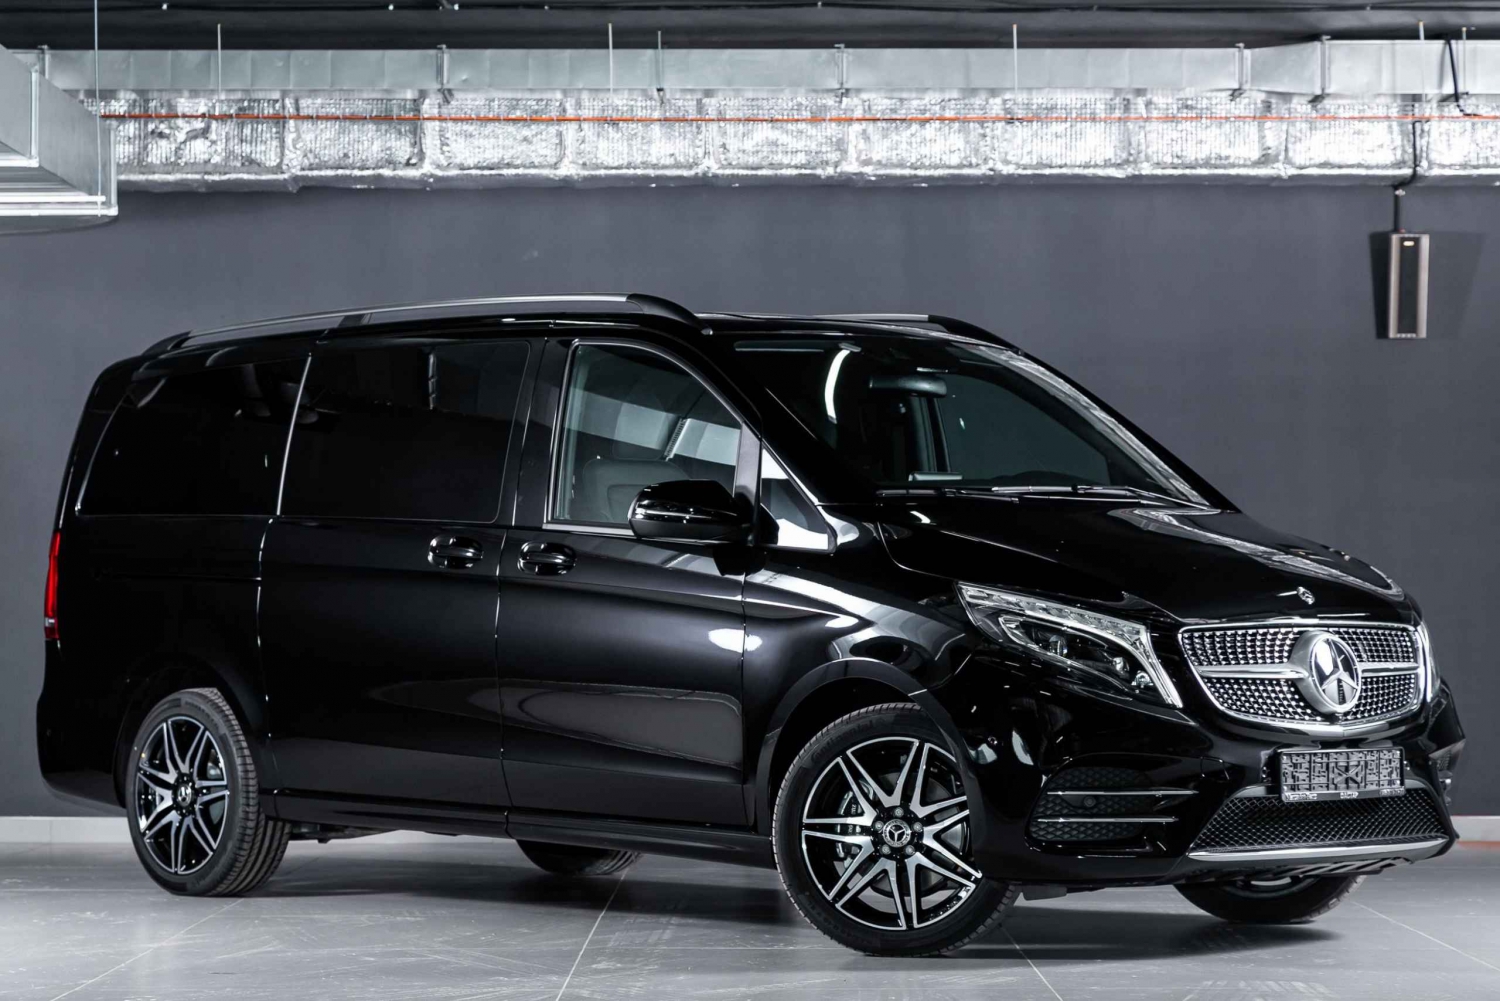 Warsaw: Chopin Airport Private Transfer